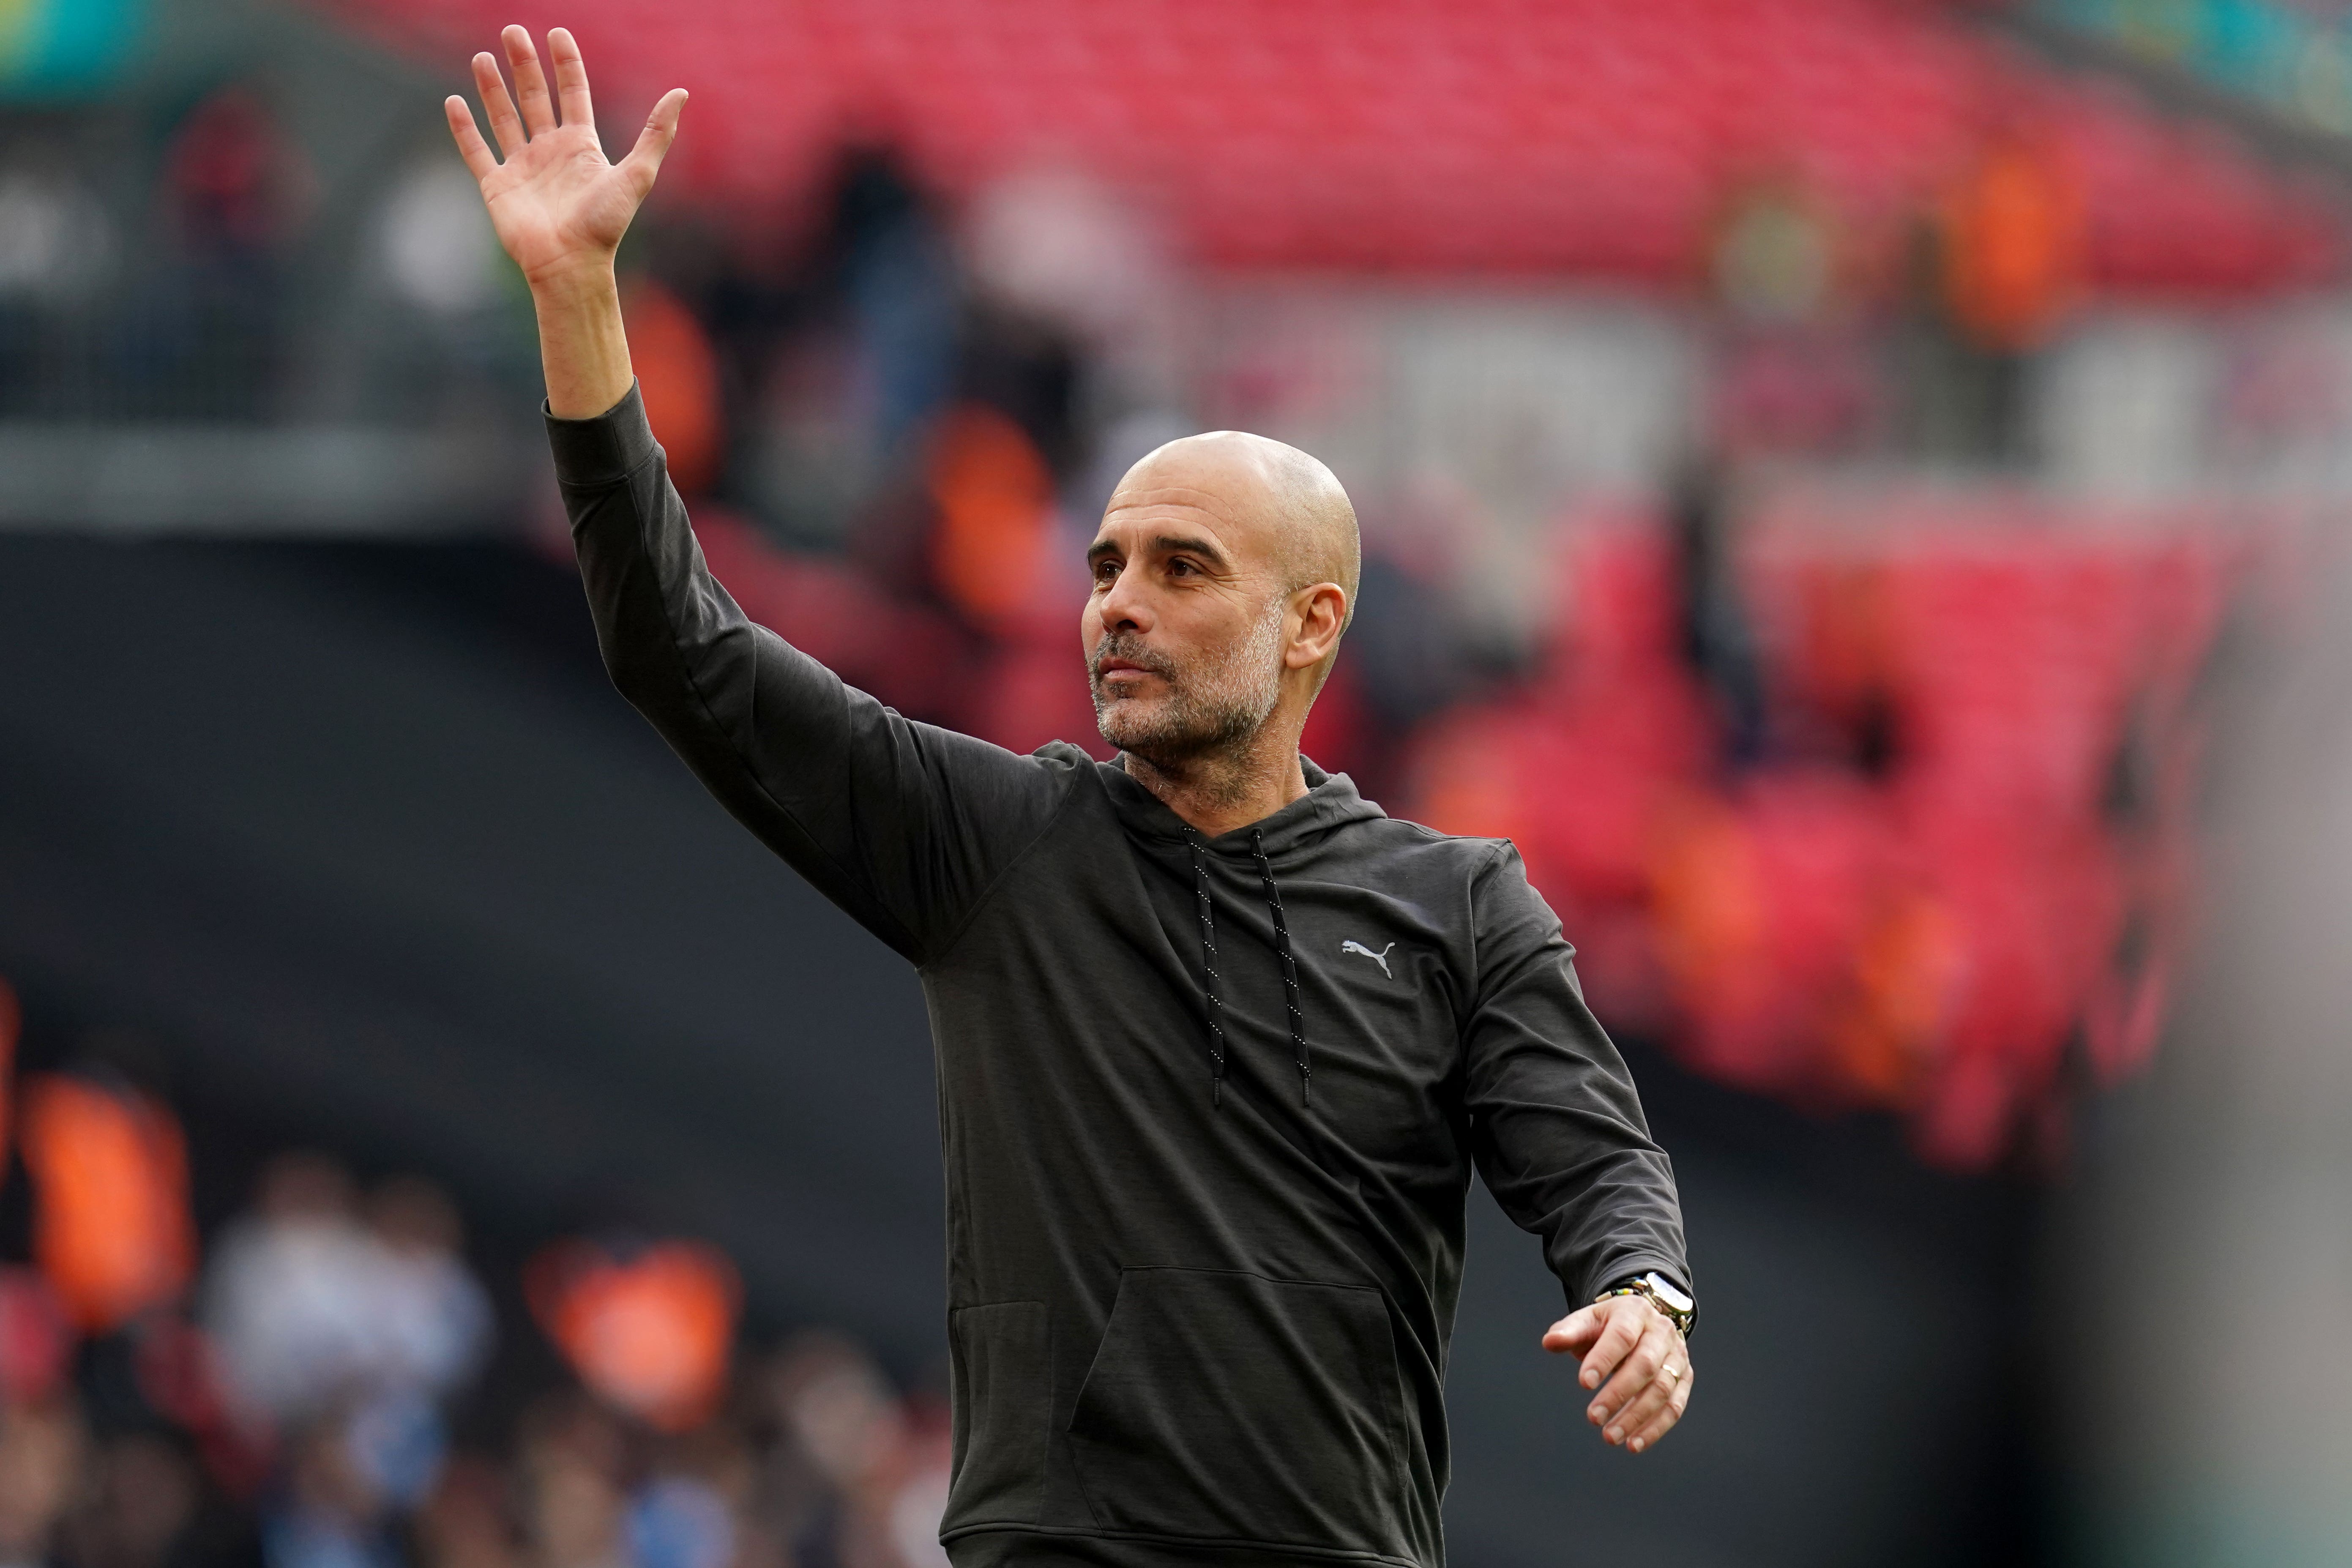 Manchester City manager Pep Guardiola salutes to the fans after the win (PA)